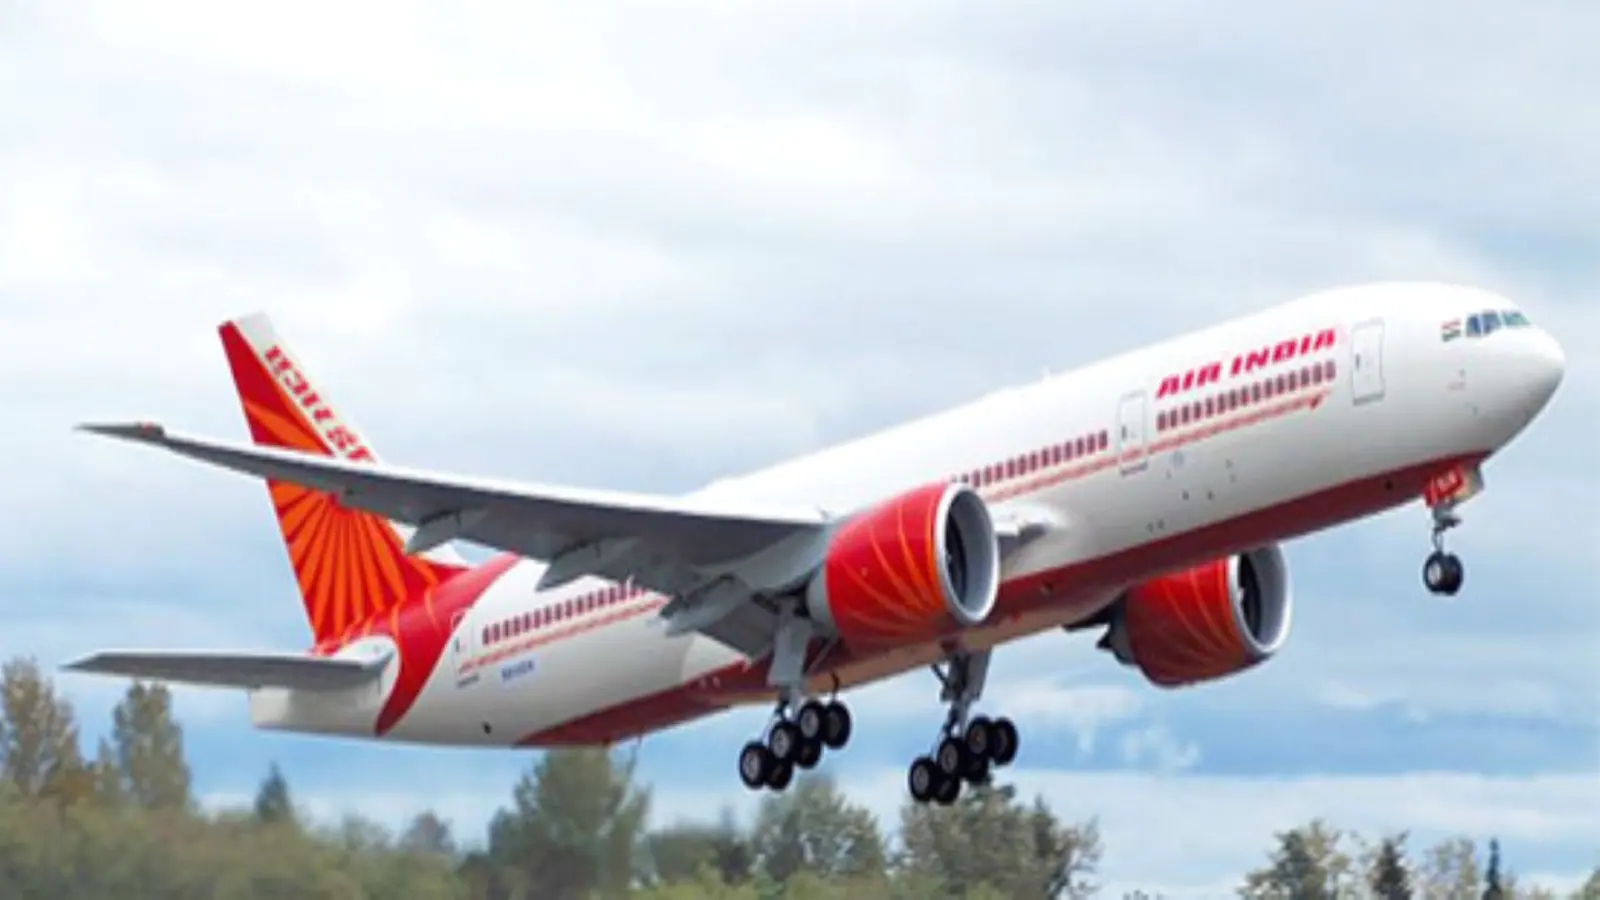 Air India fined over passenger’s mid-air urination scandal